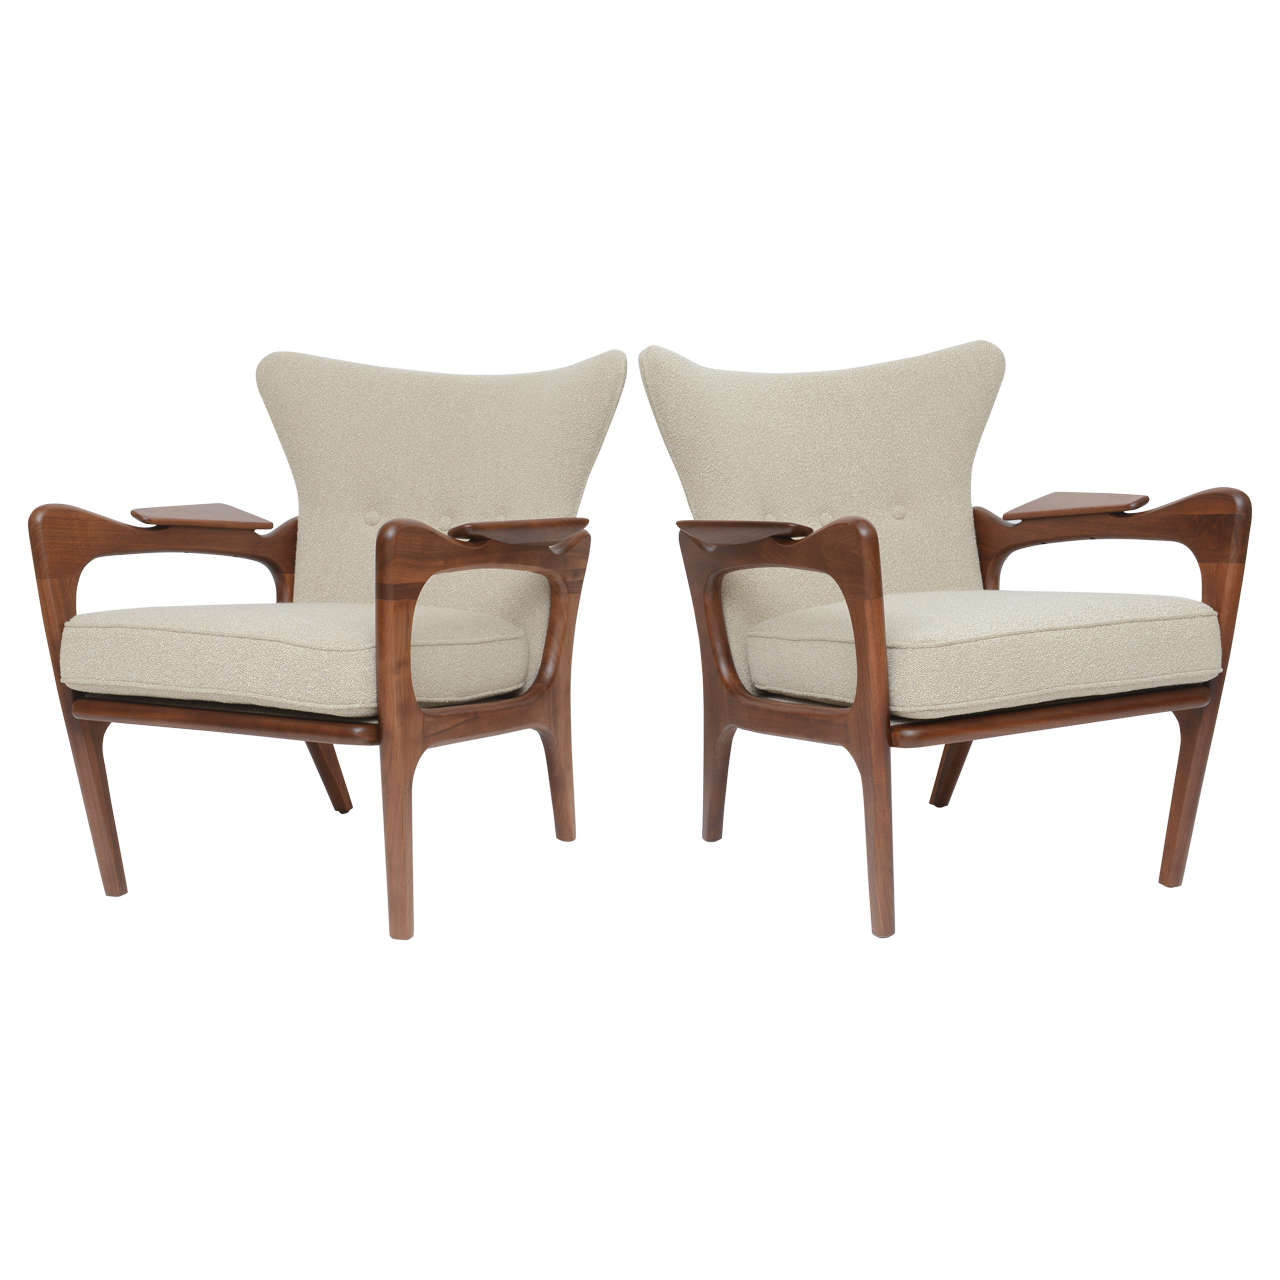 Pair of Adrian Pearsall Wing Chairs